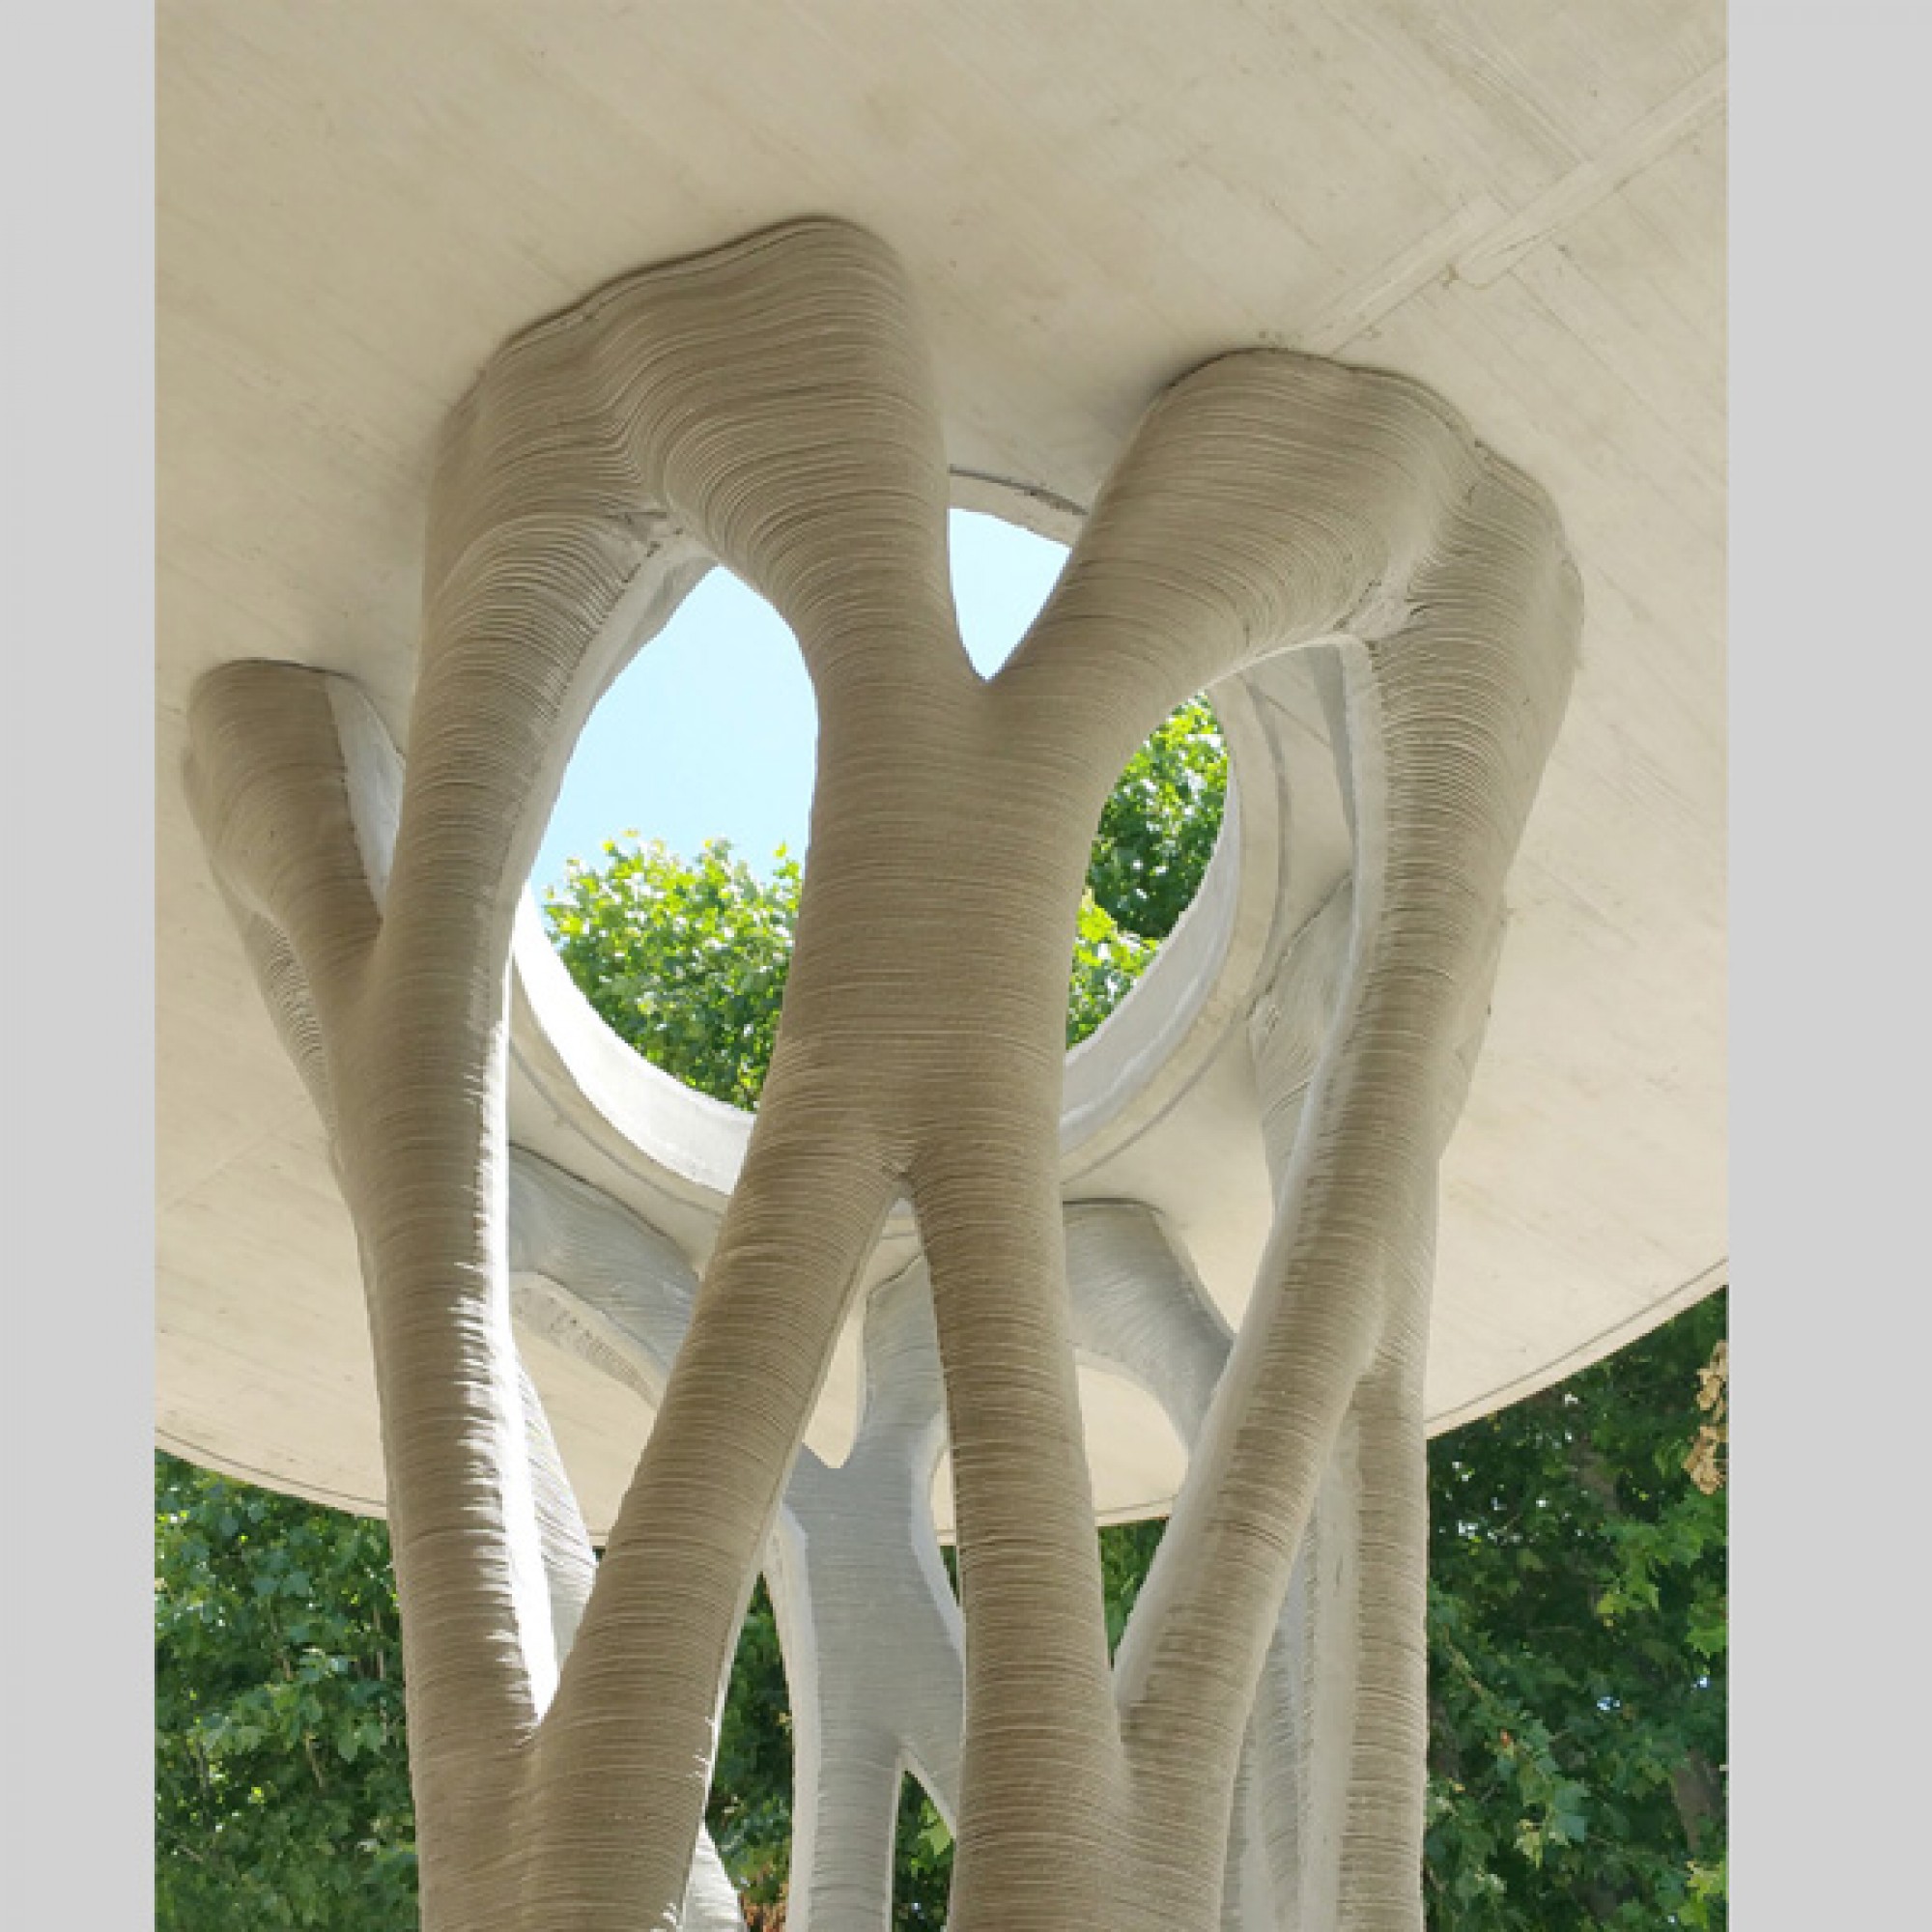 Tragende Säule „Krypton“ in Aix-en-Provence, Frankreich. Overall Project Architect: MDSA; Design: EZCT Architecture & Design Research + XtreeE; Machine Files & Manufacturing oft he Molds: XtreeE; Casting and Implementation: Fehr Architectural; Structural 